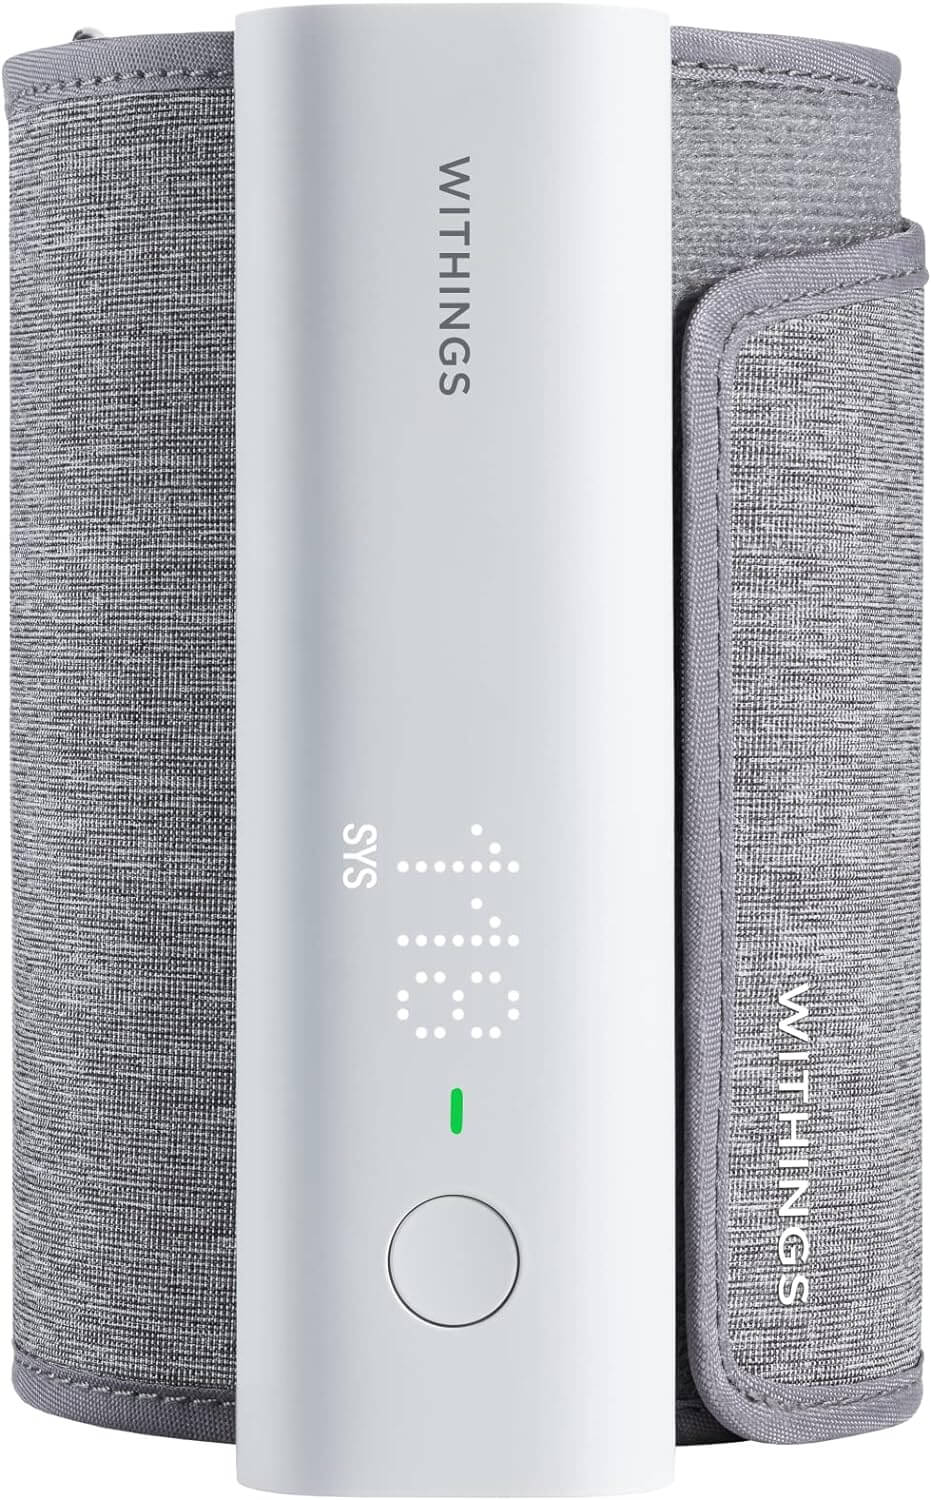 Withings Wi-Fi Smart Blood Pressure Monitor